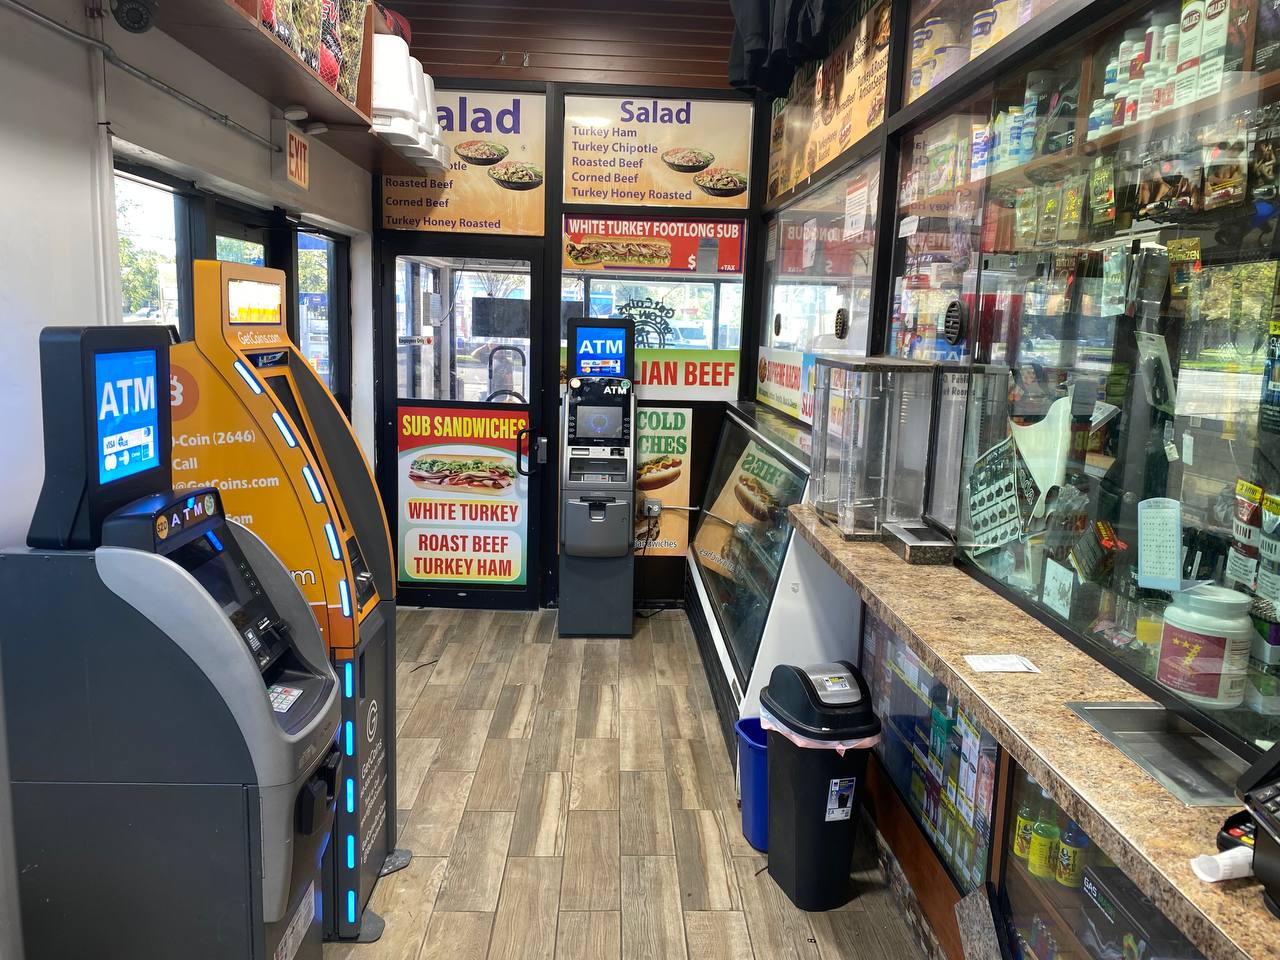 Getcoins - Bitcoin ATM - Inside of Clark Gas in Chicago, Illinois